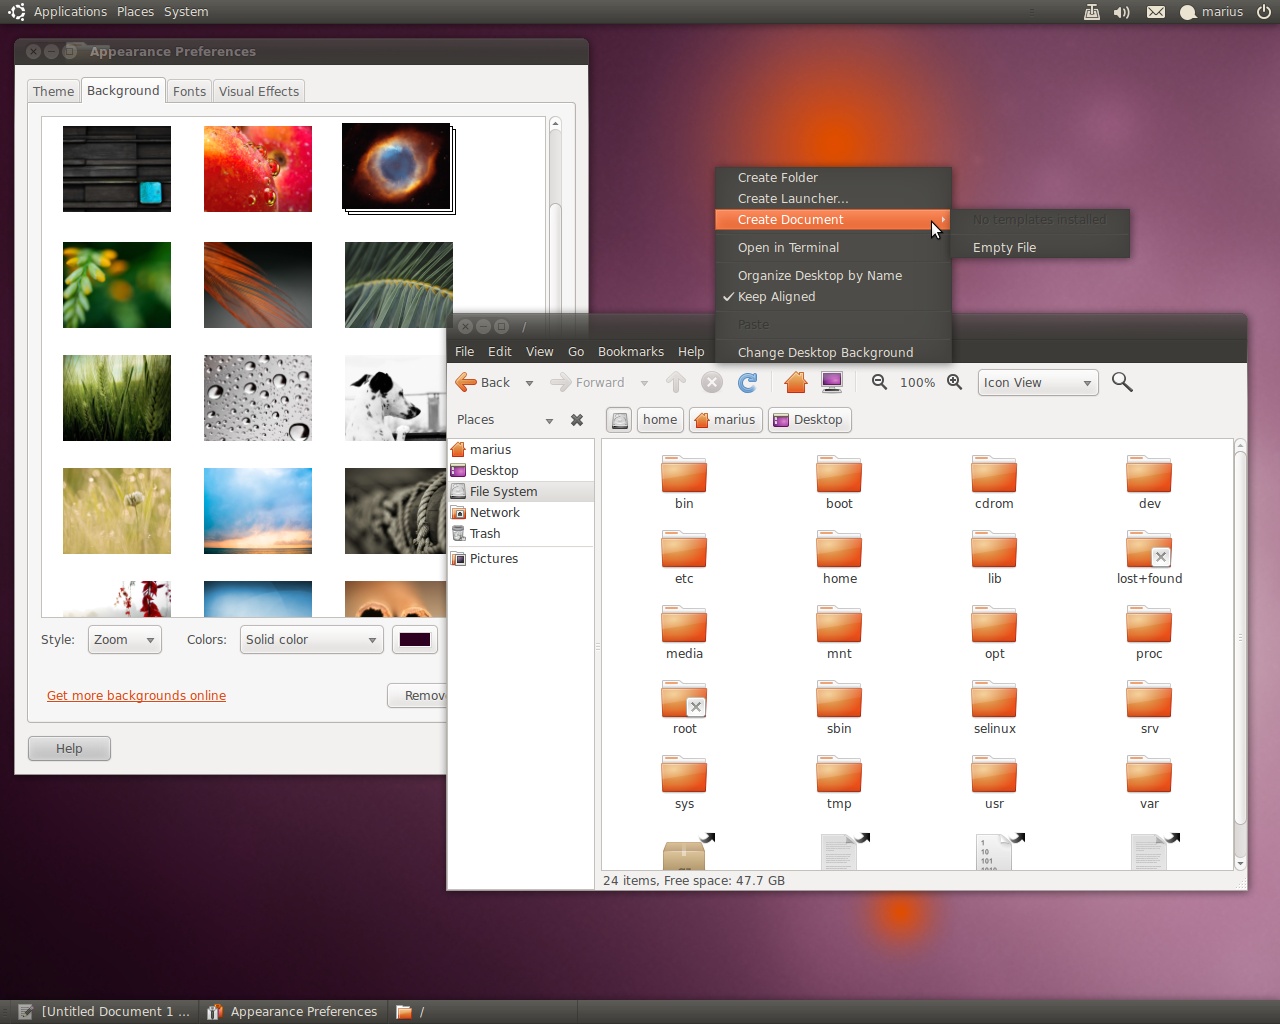 The New Wallpapers and Theme of Ubuntu 1010   Softpedia